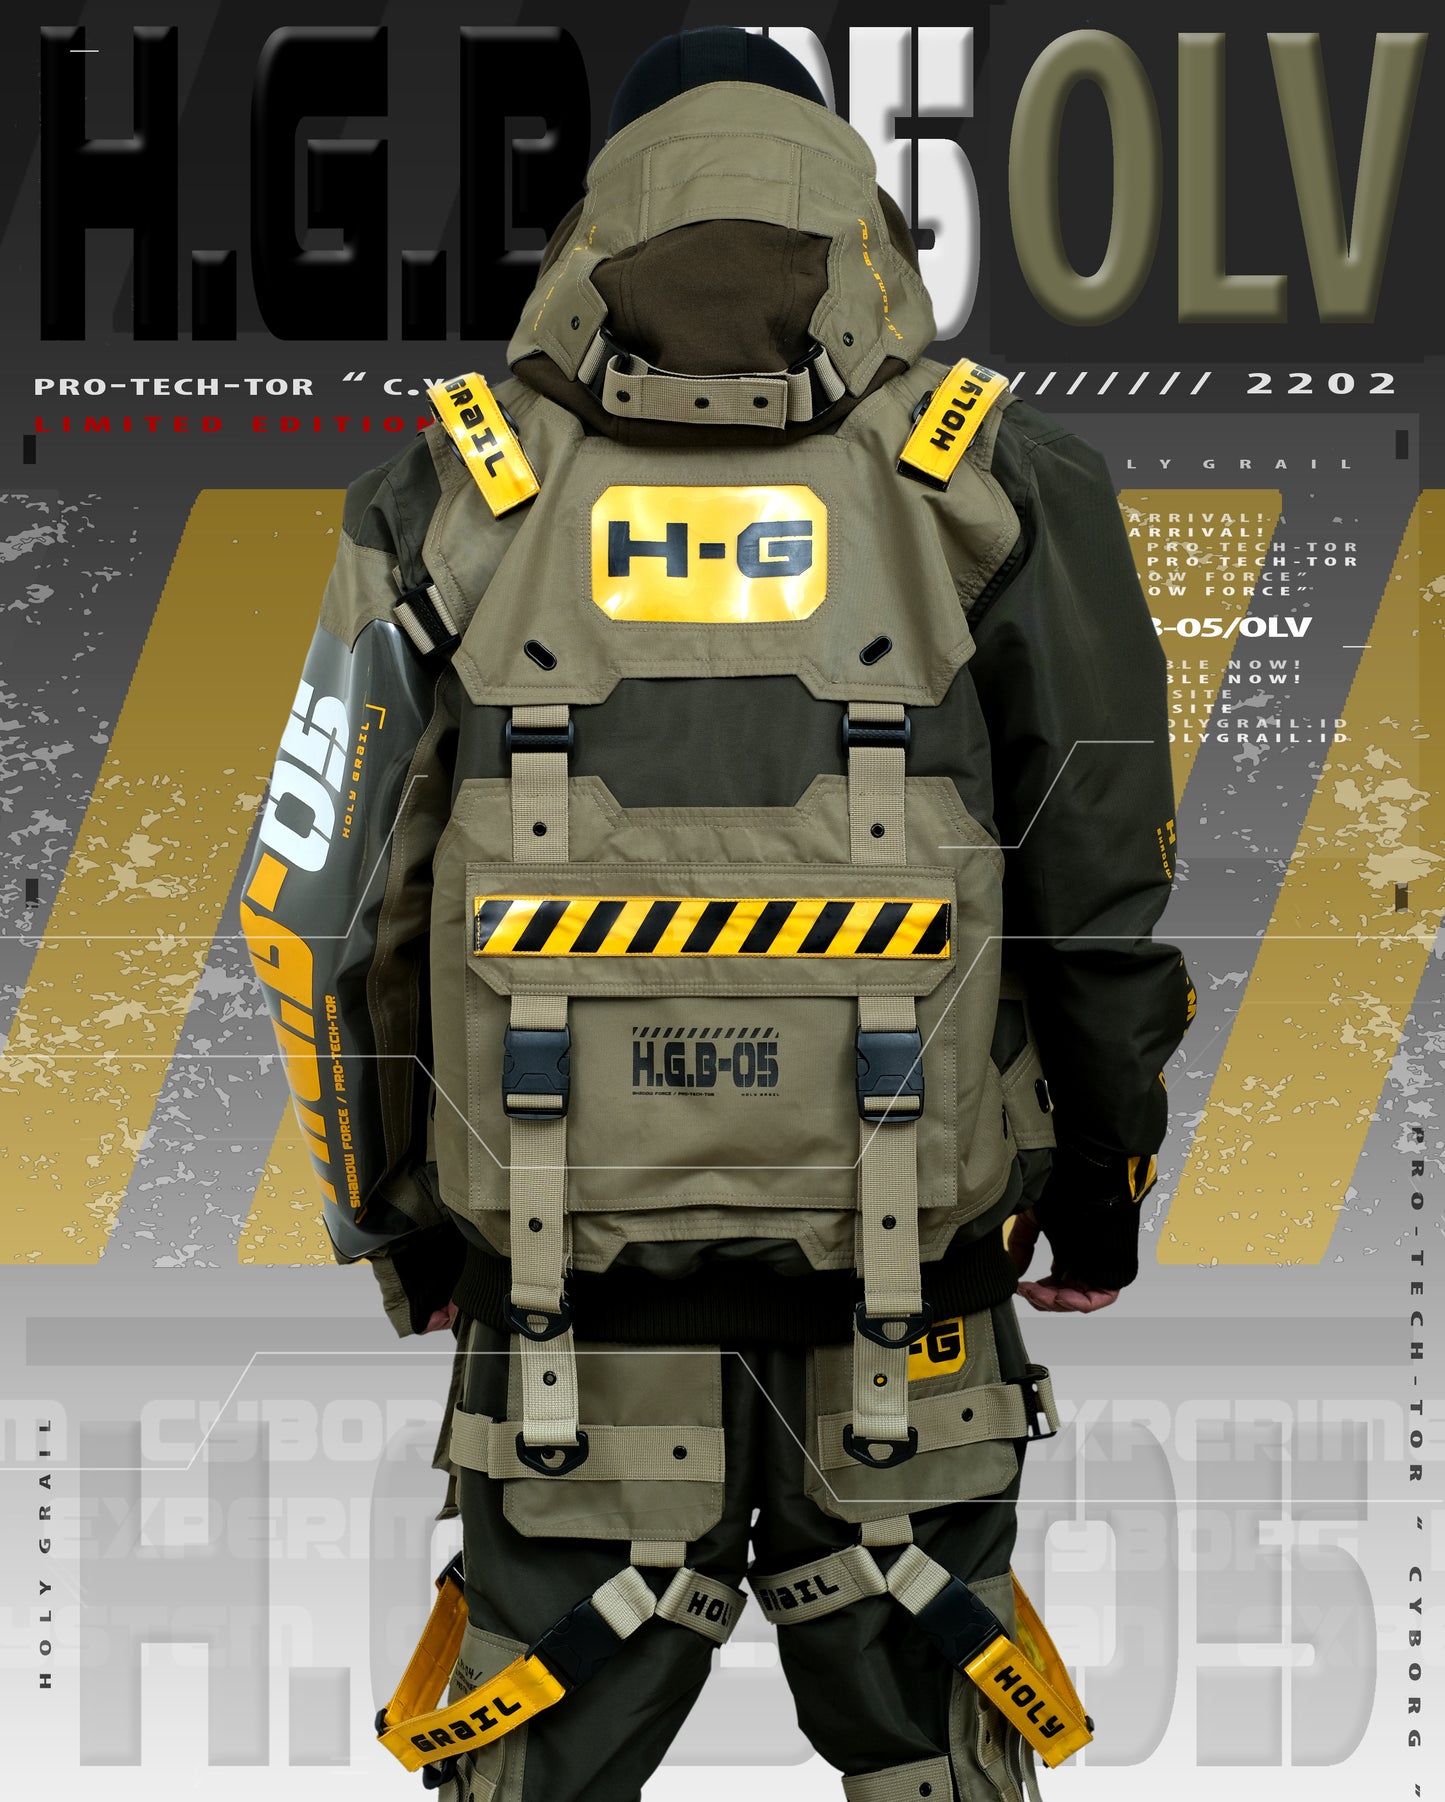 H.G.B-05/OLV (LIMITED EDITION 200 PIECES ONLY!) SOLD OUT!